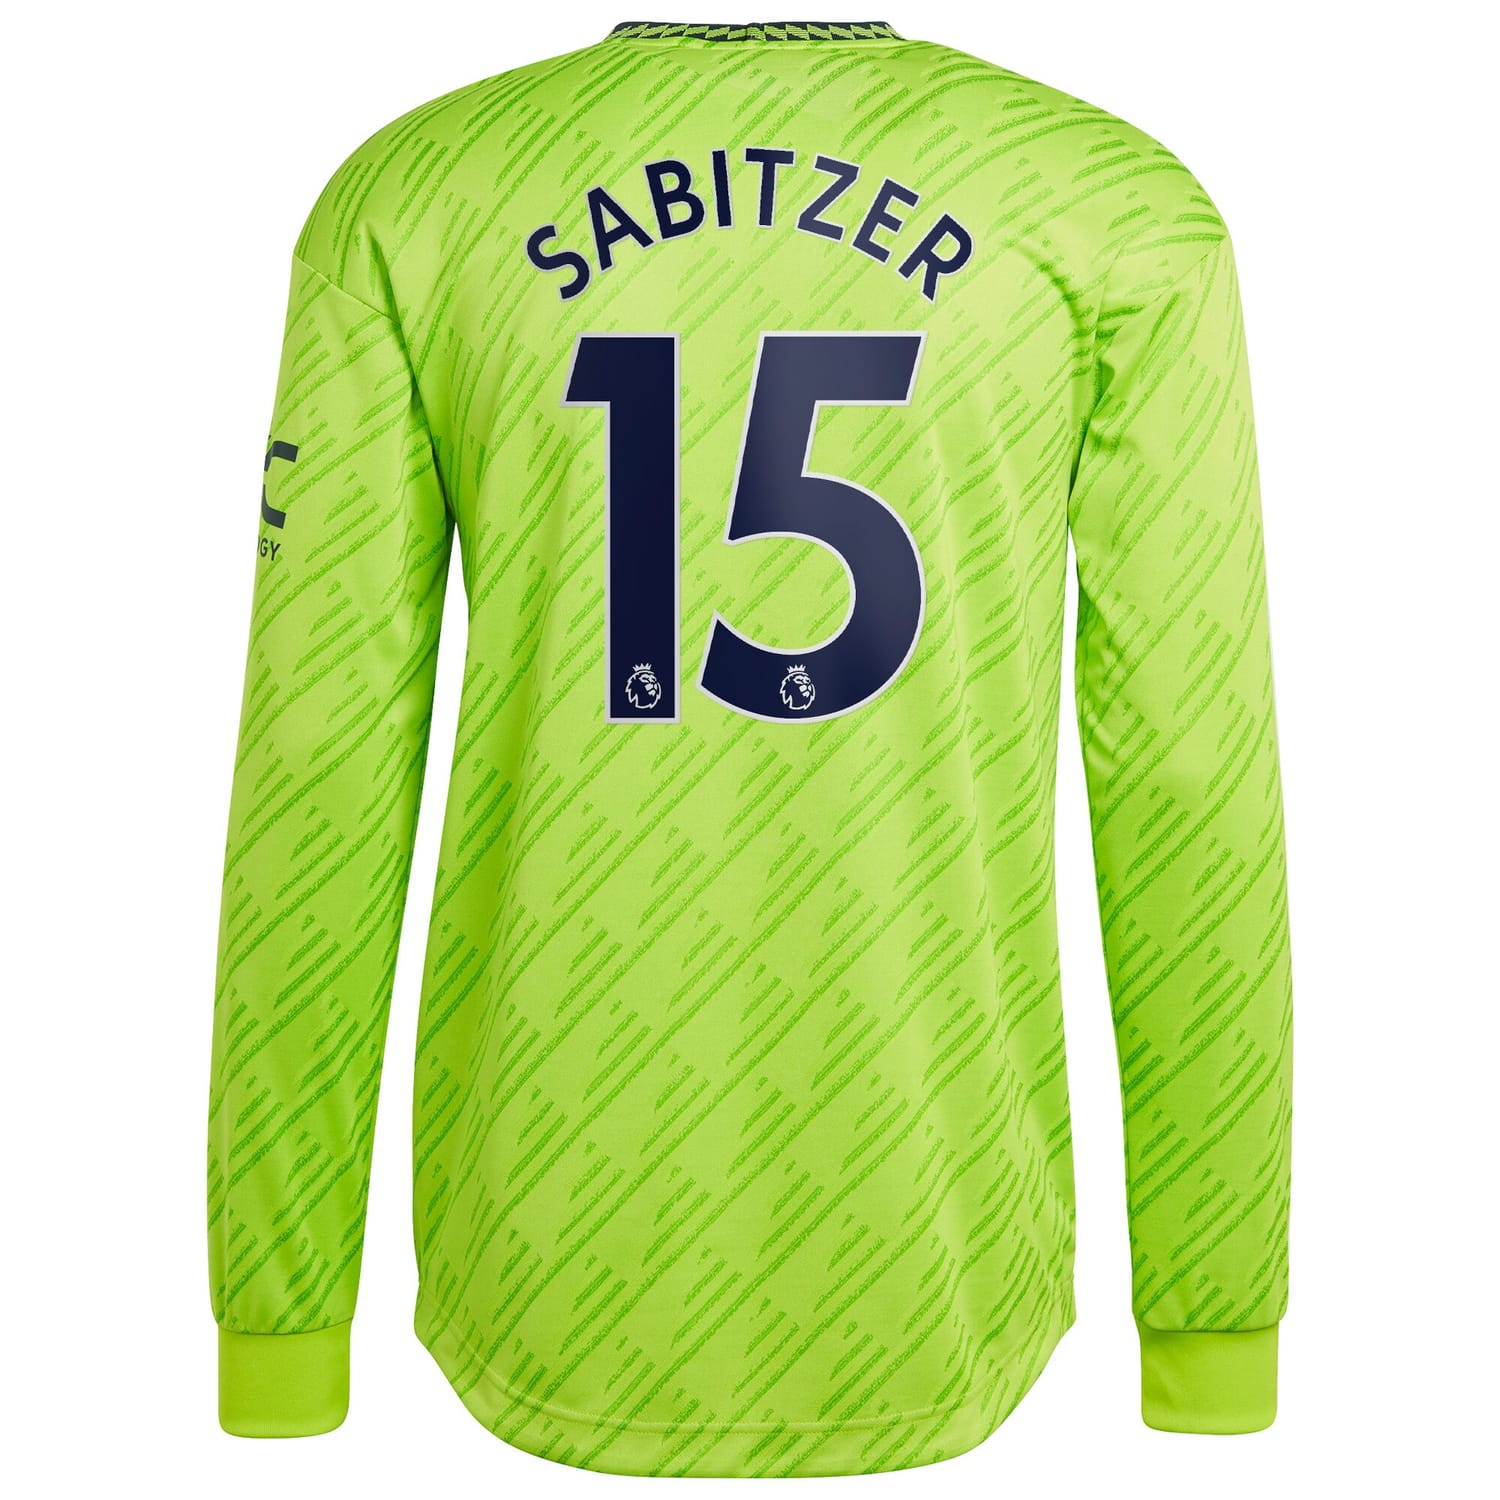 Premier League Manchester United Third Authentic Jersey Shirt Long Sleeve 2022-23 player Marcel Sabitzer 15 printing for Men